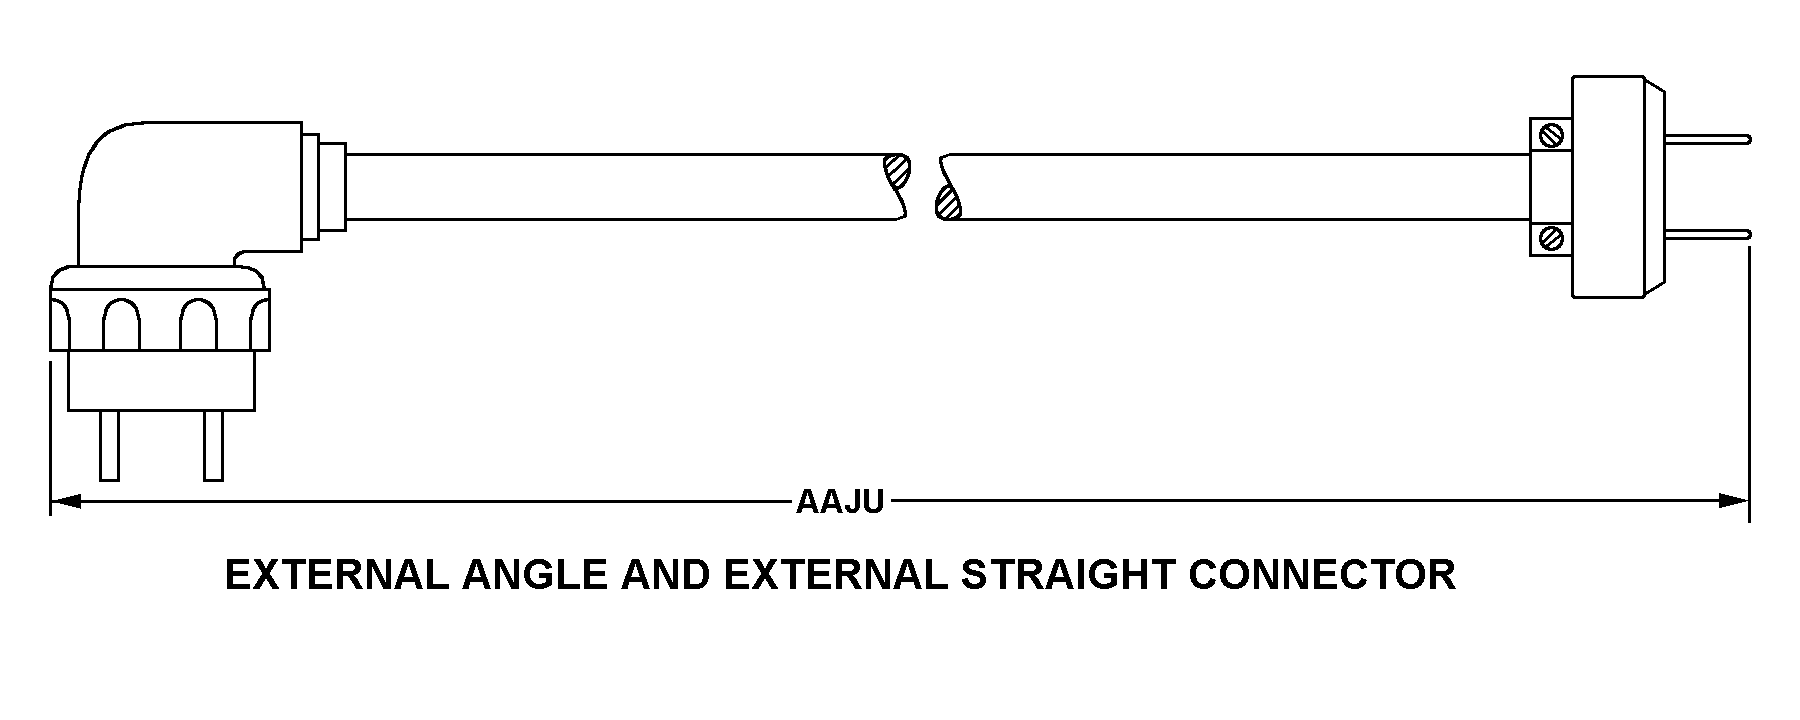 EXTERNAL ANGLE AND EXTERNAL STRAIGHT CONNECTOR style nsn 5995-01-383-3283